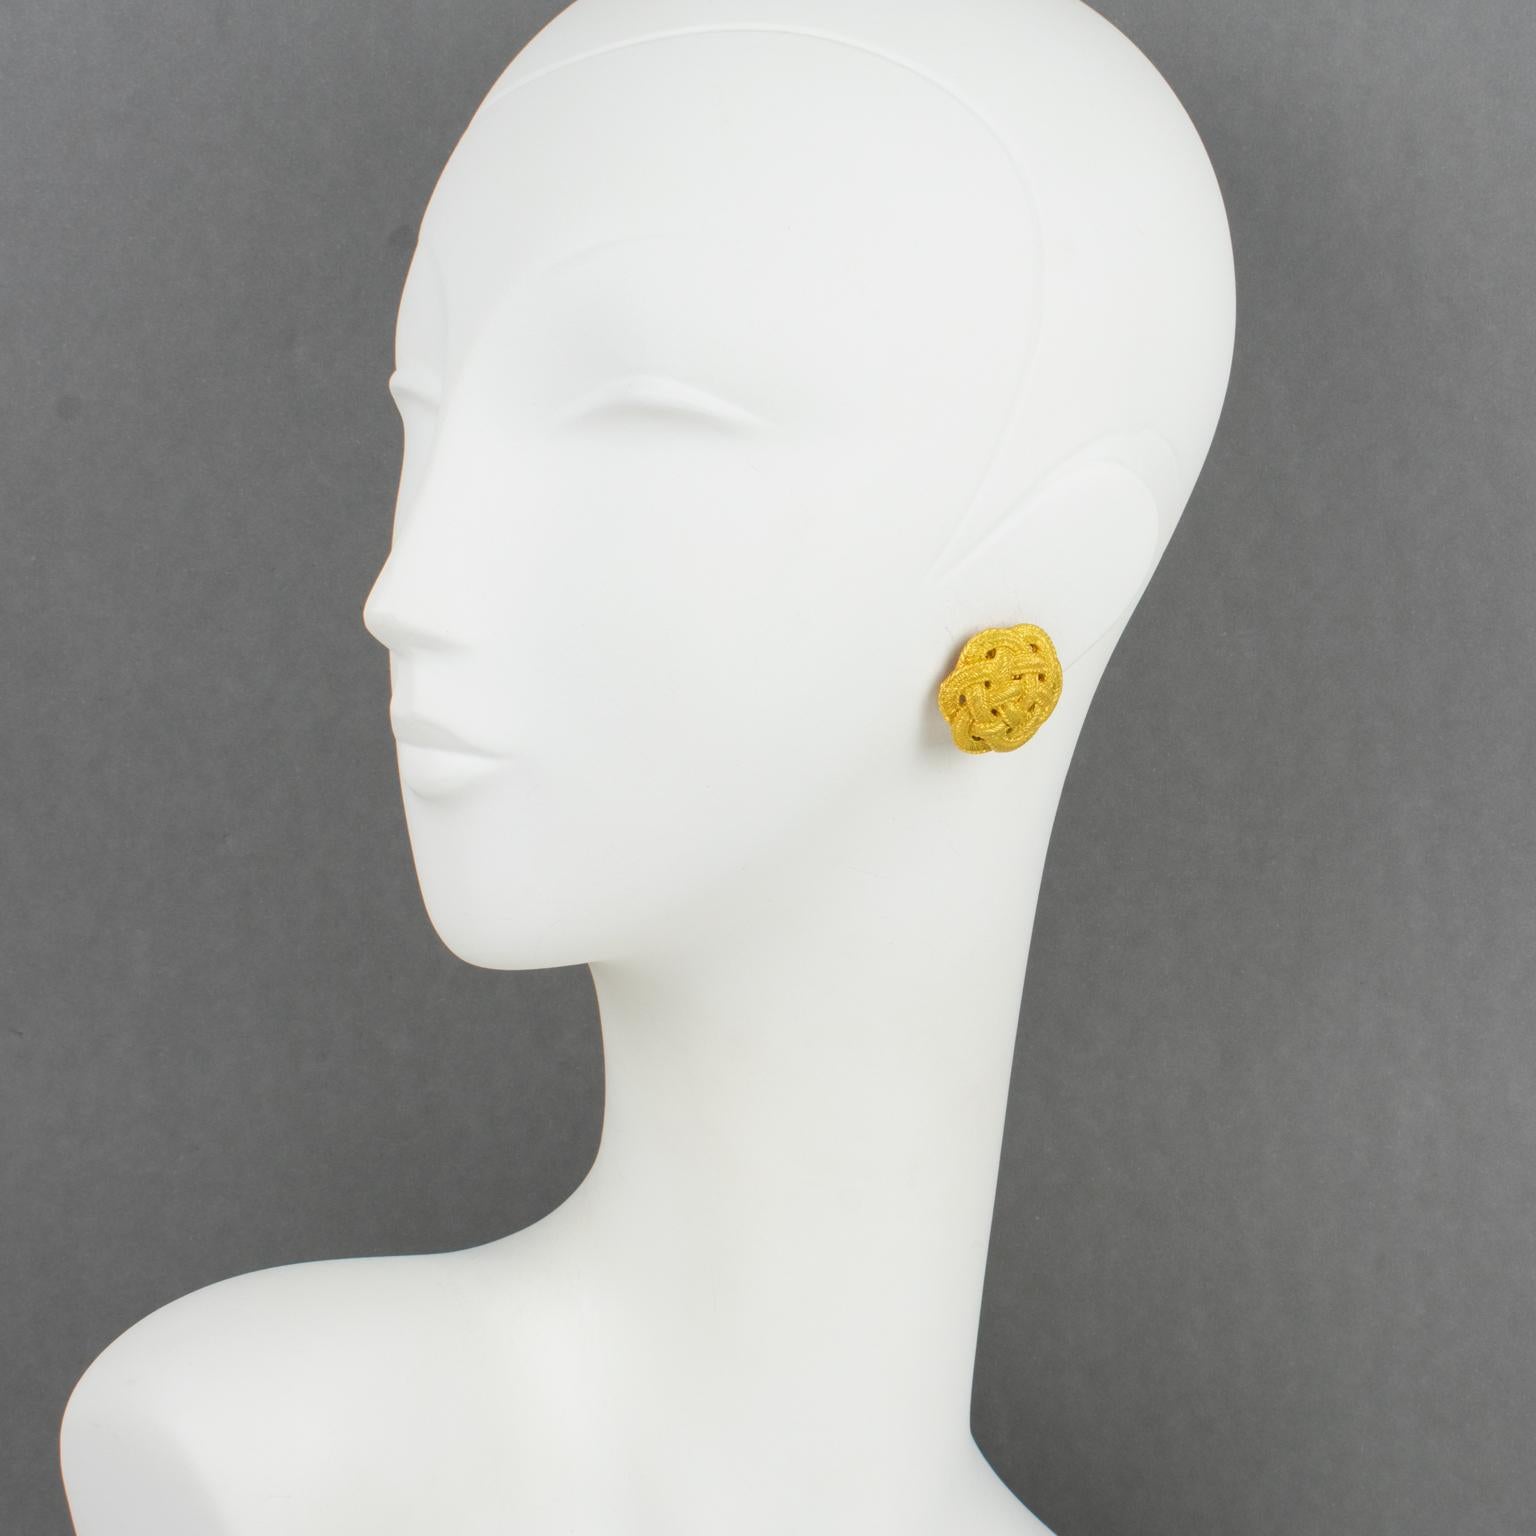 These elegant Emanuel Ungaro Paris couture clip-on earrings feature a gilt metal domed rounded shape with a braided carved pattern and satin finish texture. Each piece is signed with a tag underside reading Ungaro.
The earrings are in good